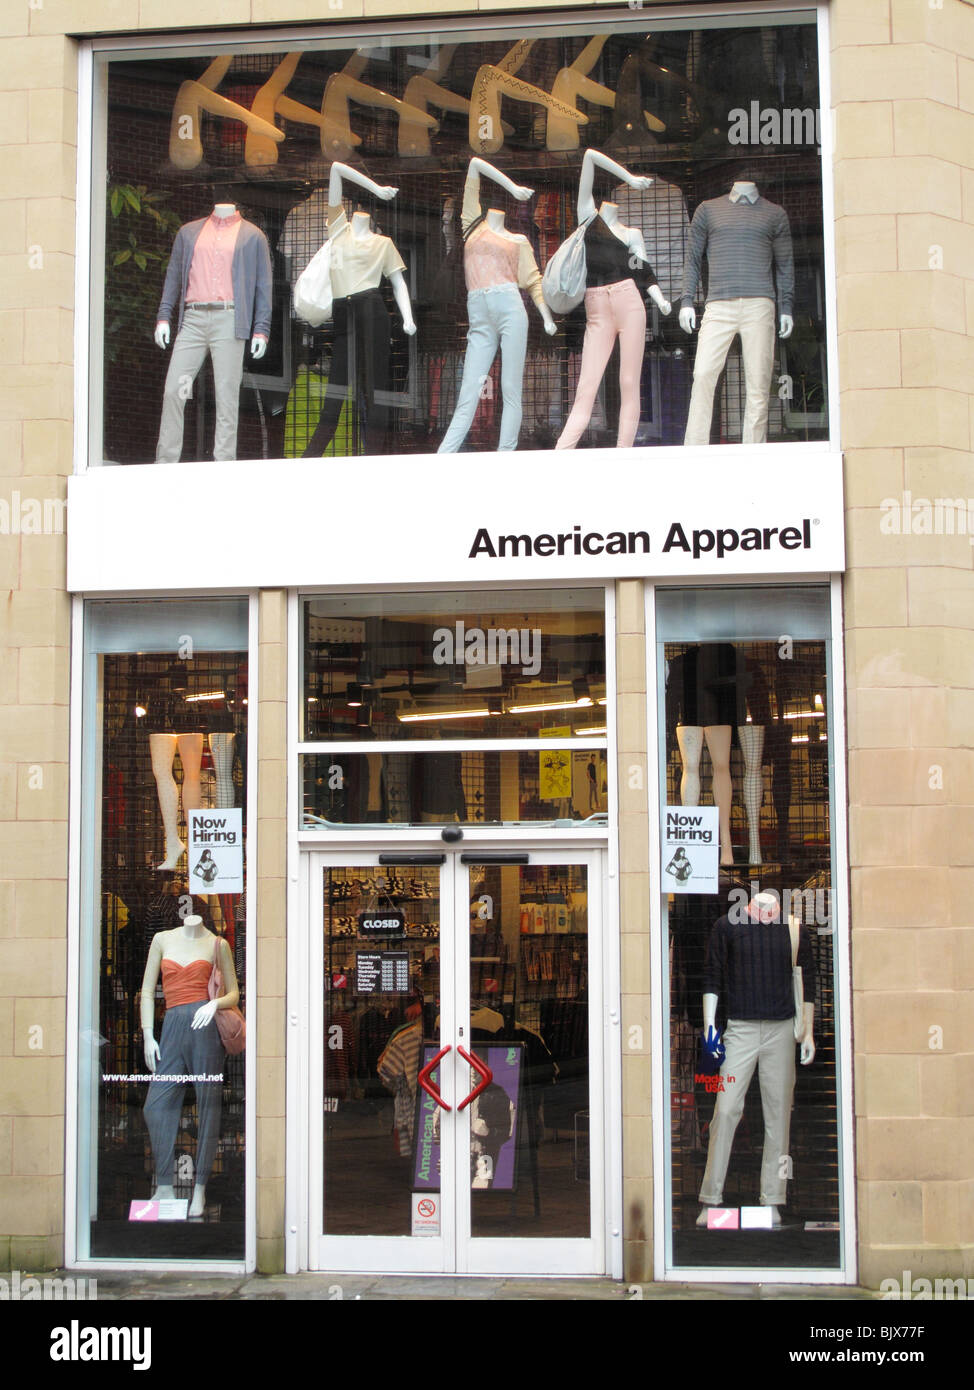 An American Apparel retail outlet in Nottingham, England, U.K. Stock Photo